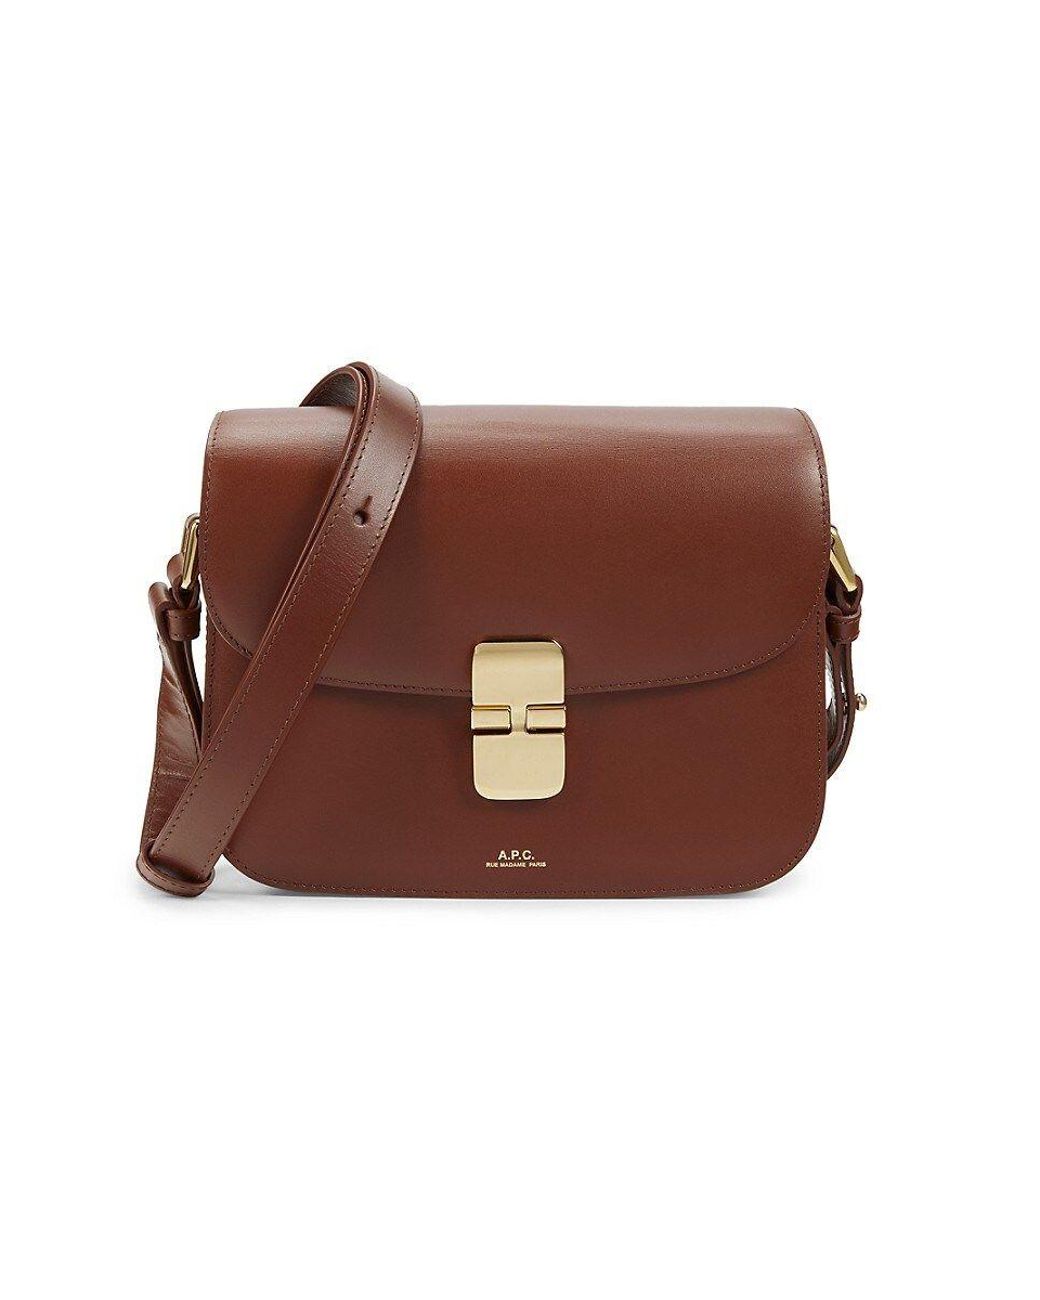 A.P.C. Small Sac Grace Leather Shoulder Bag in Brown | Lyst